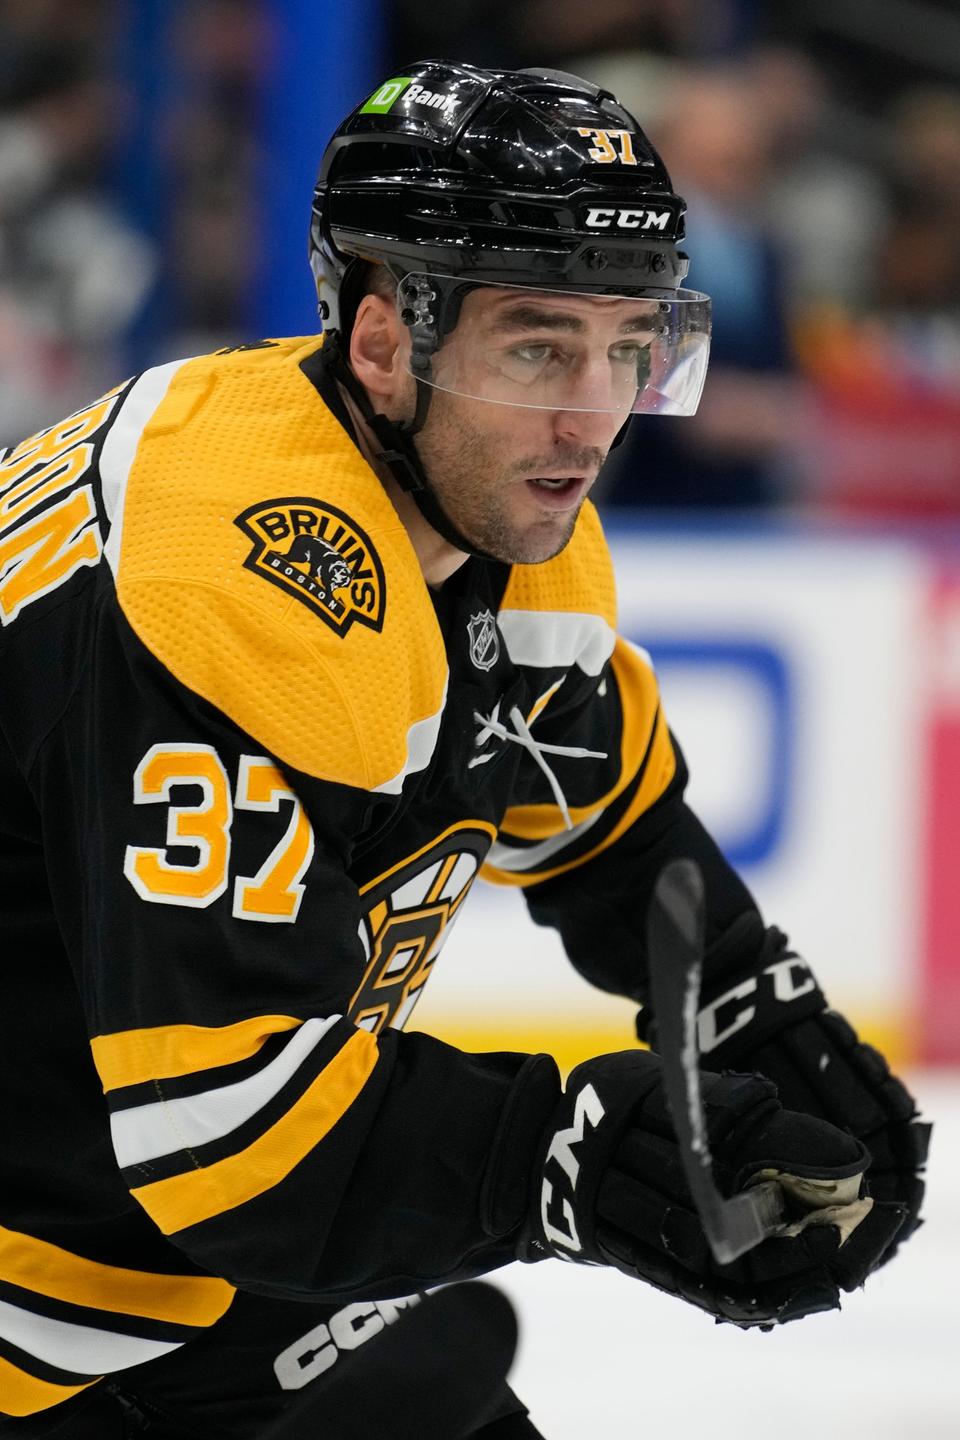 Boston Bruins center Patrice Bergeron (37) against the Tampa Bay Lightning during the first period of an NHL hockey game Thursday, Jan. 26, 2023, in Tampa, Fla. (AP Photo/Chris O'Meara)